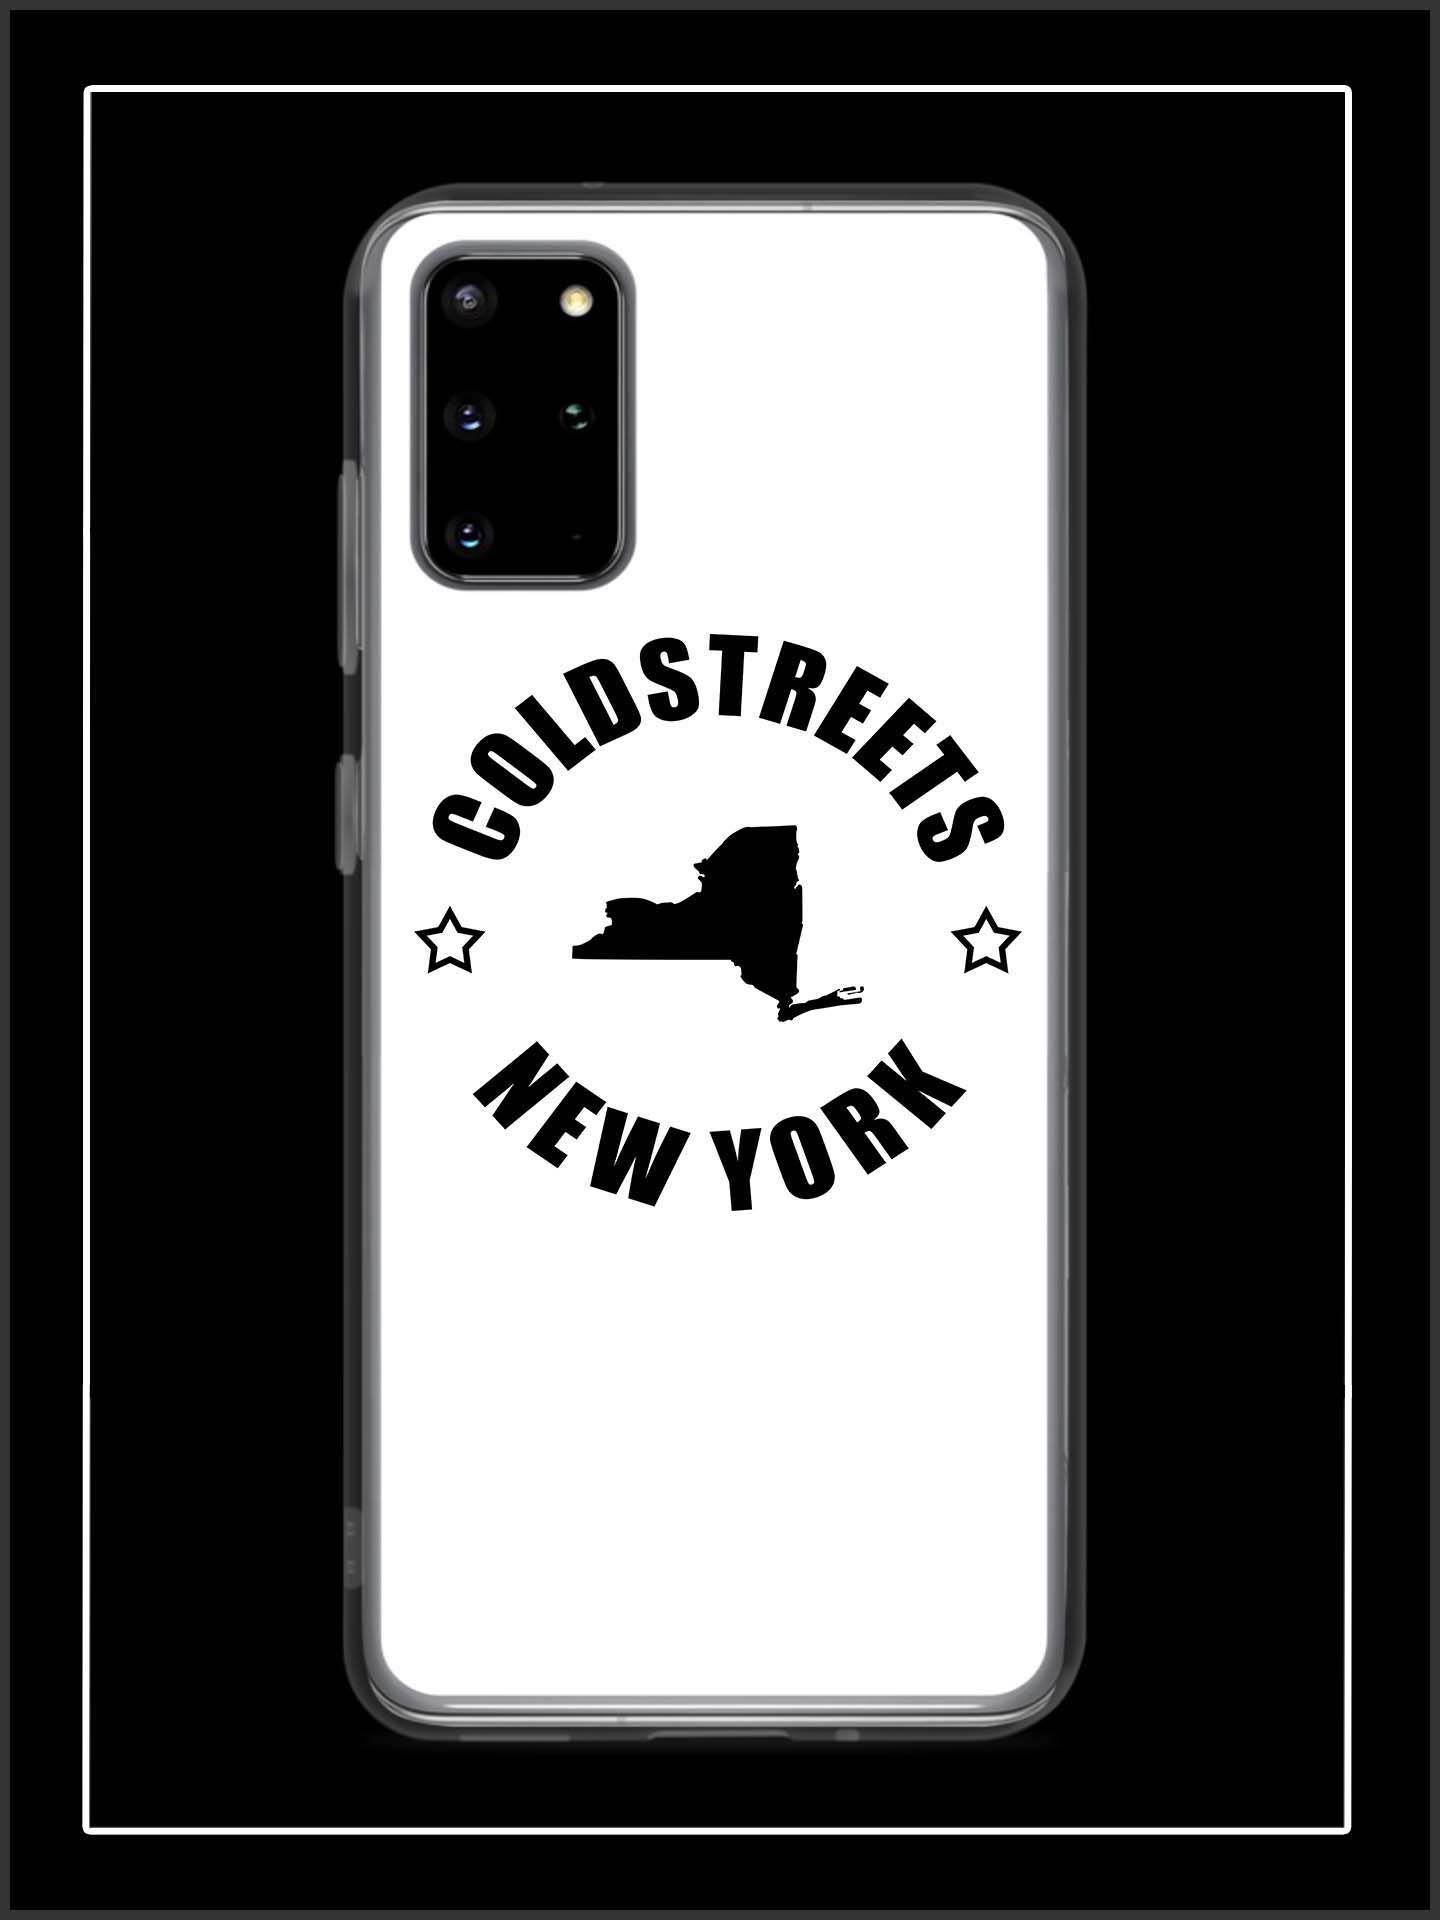 Cold Streets New York Samsung Cases